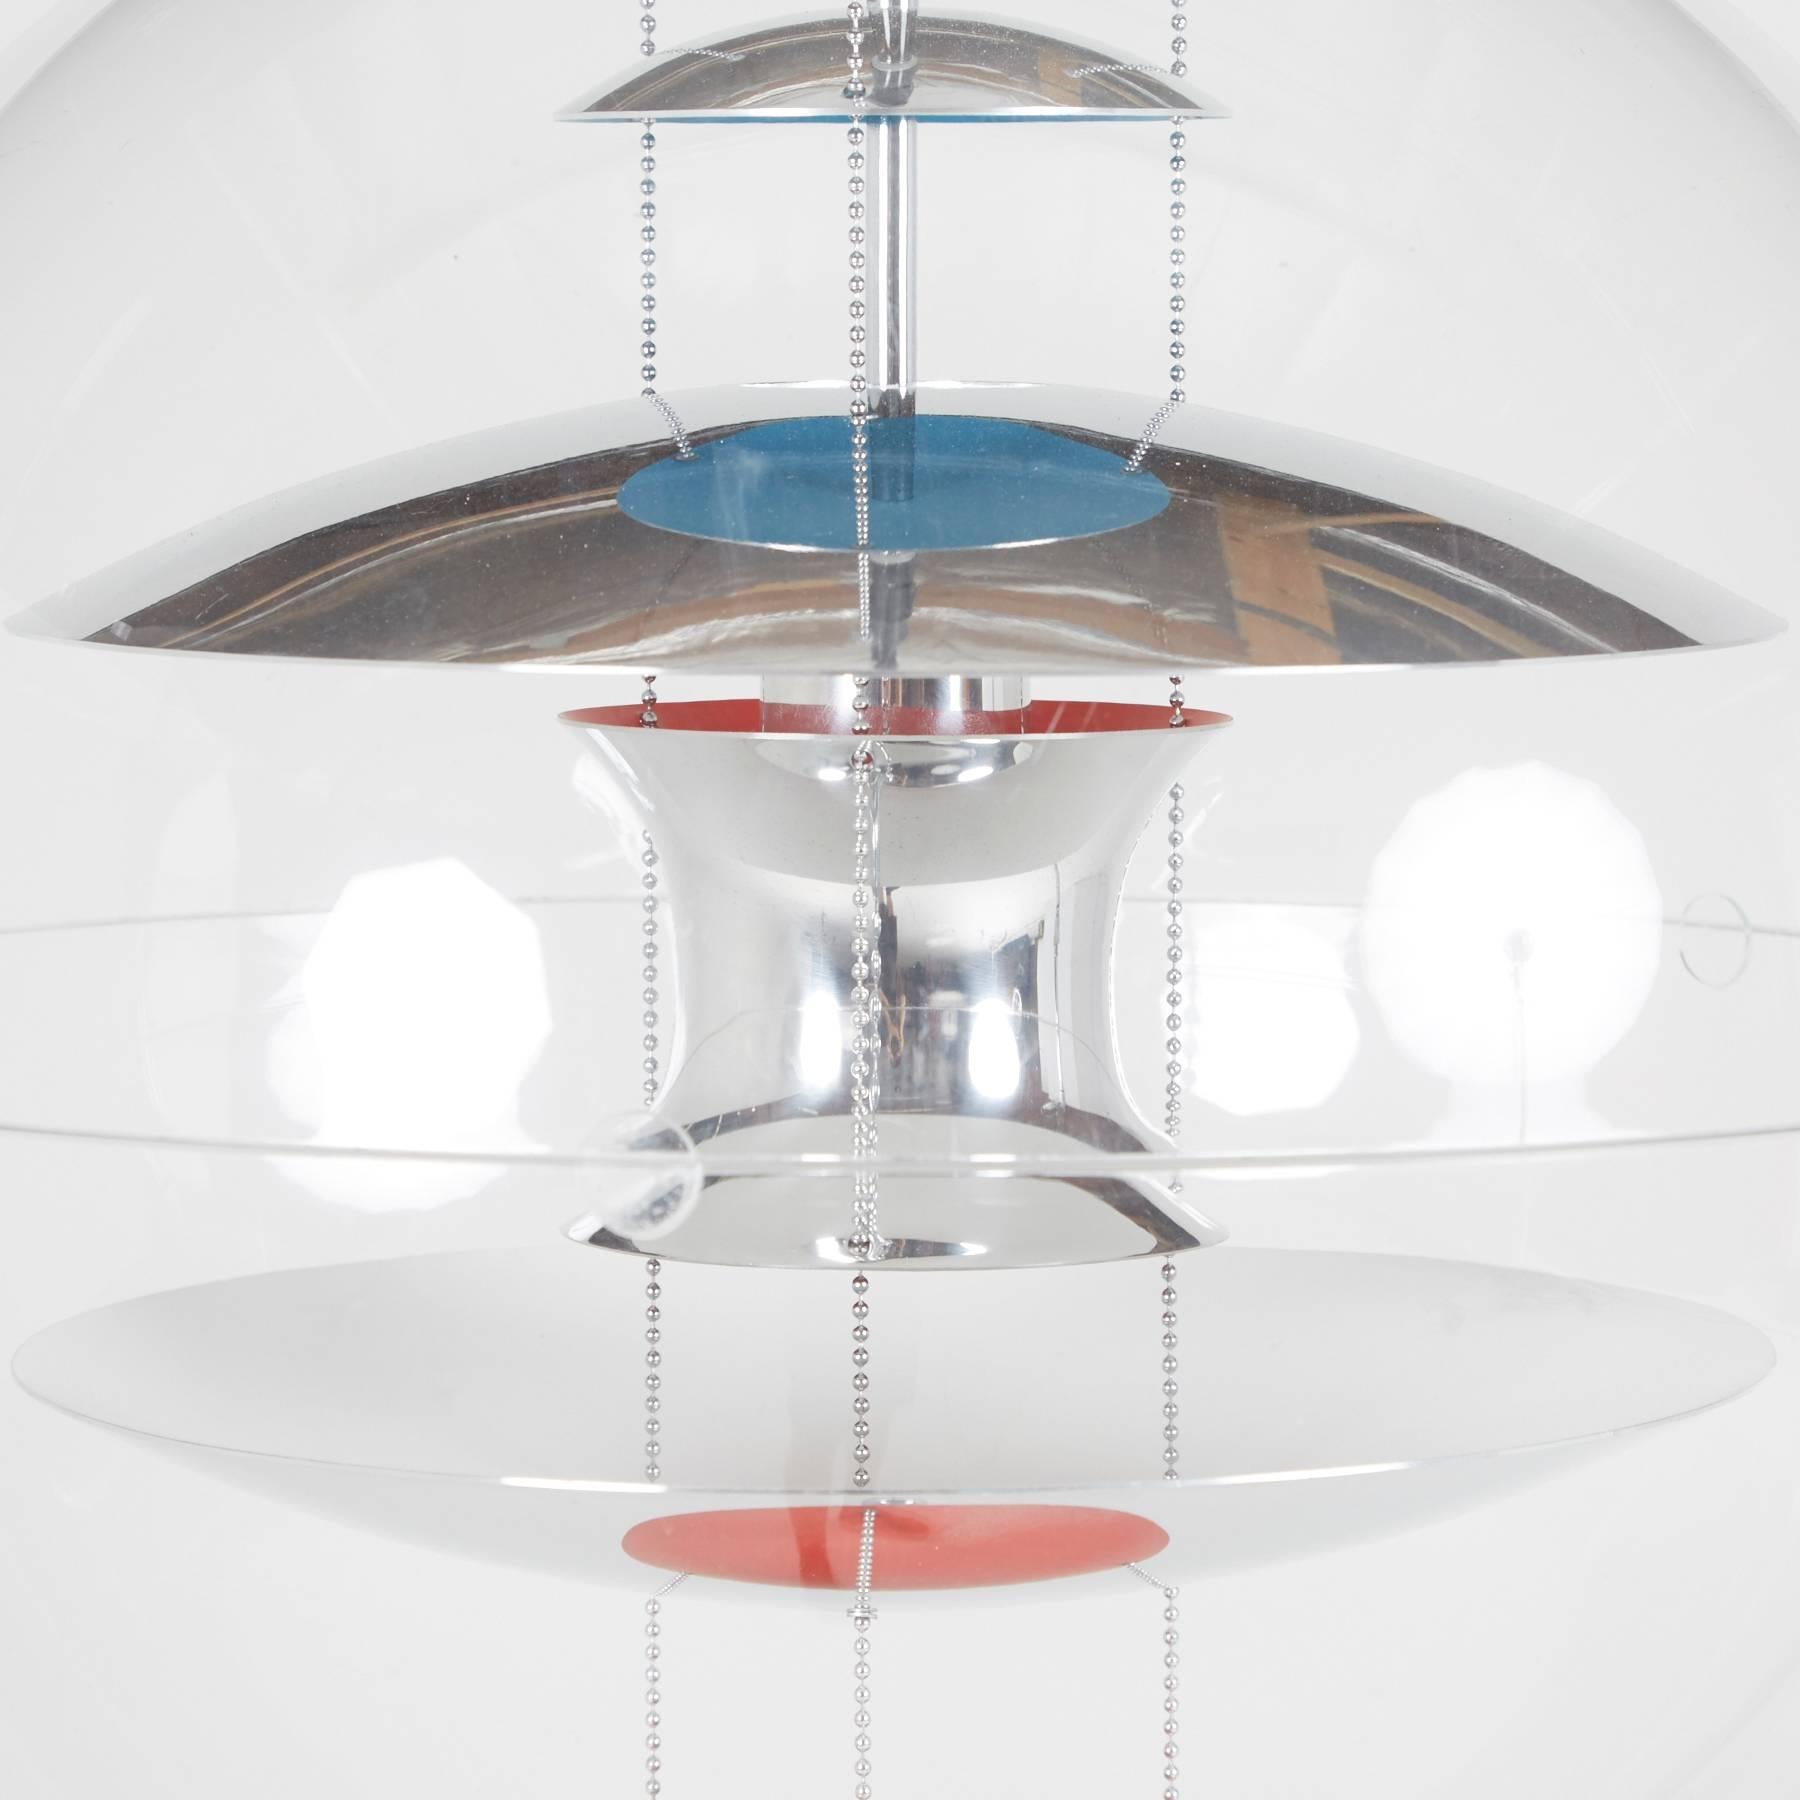 An incredible 1969 design by Verner Panton, this acrylic globe encompasses five curved reflectors suspended through the center - three chrome, one red, the other blue. With Panton's phenomenal use of color, shapes, and space, the breadth of this